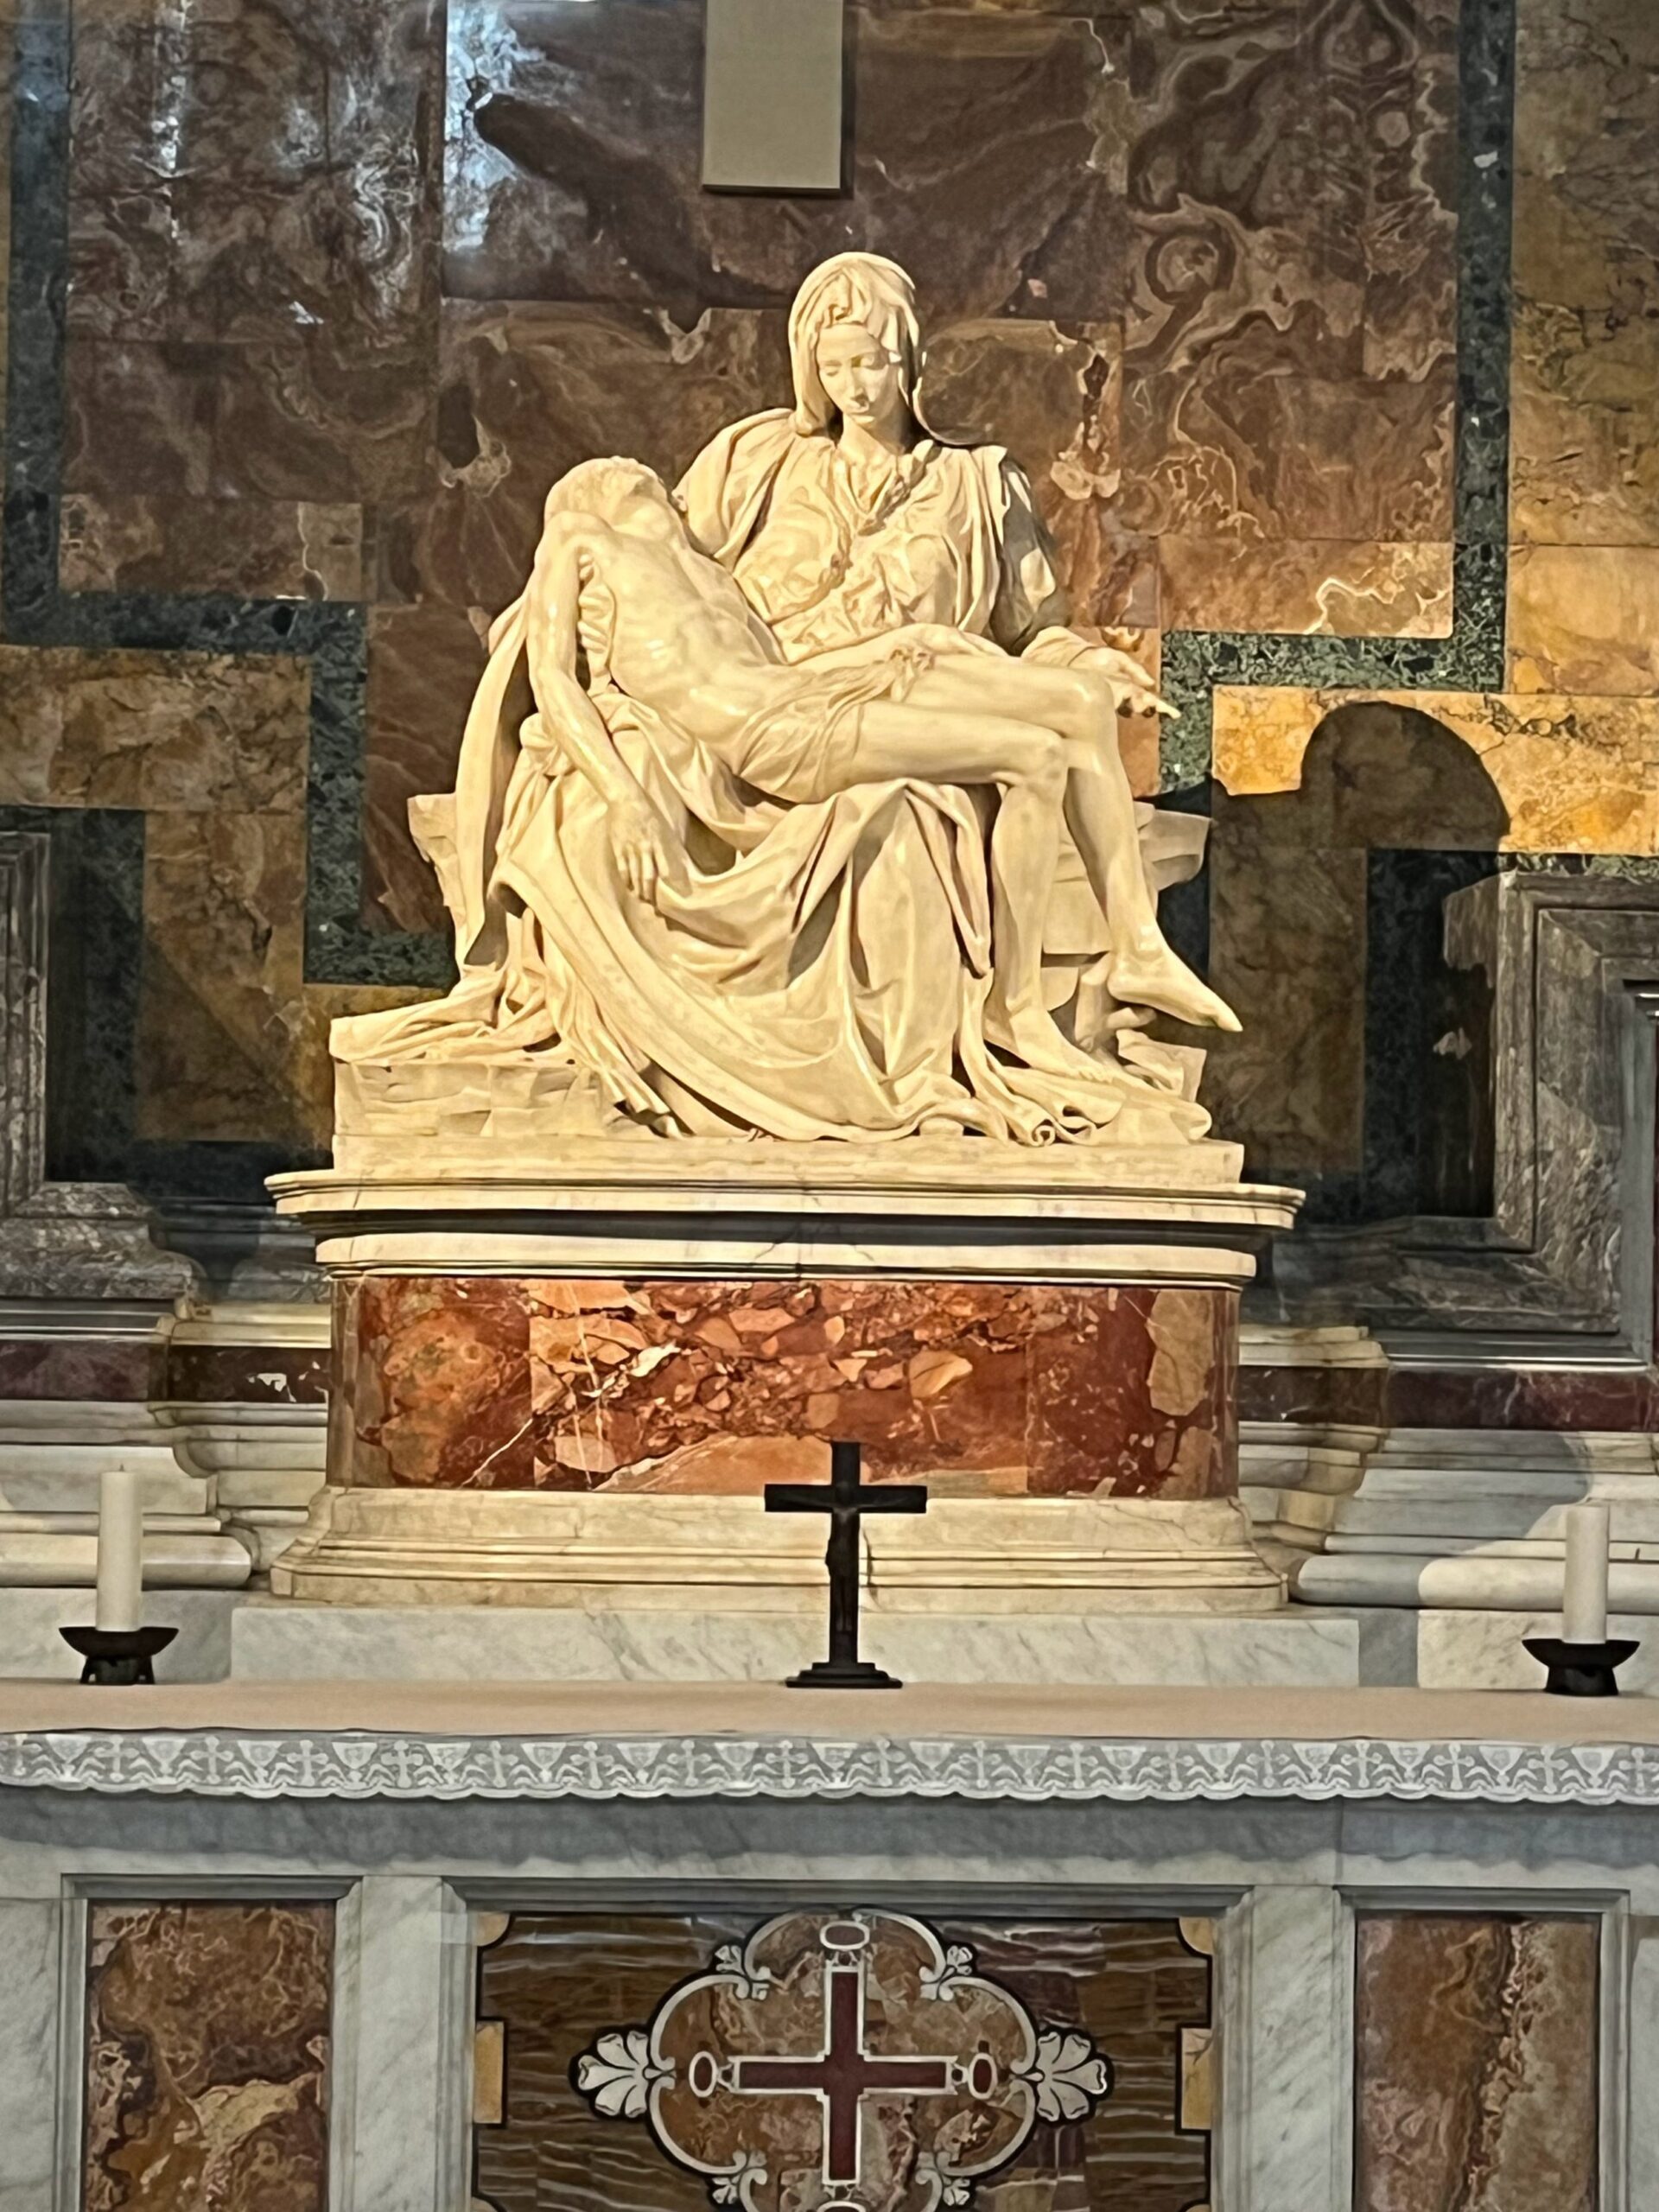 The Pieta by Michelangelo in St. Peter’s Basilica taken during a recent trip to Rome